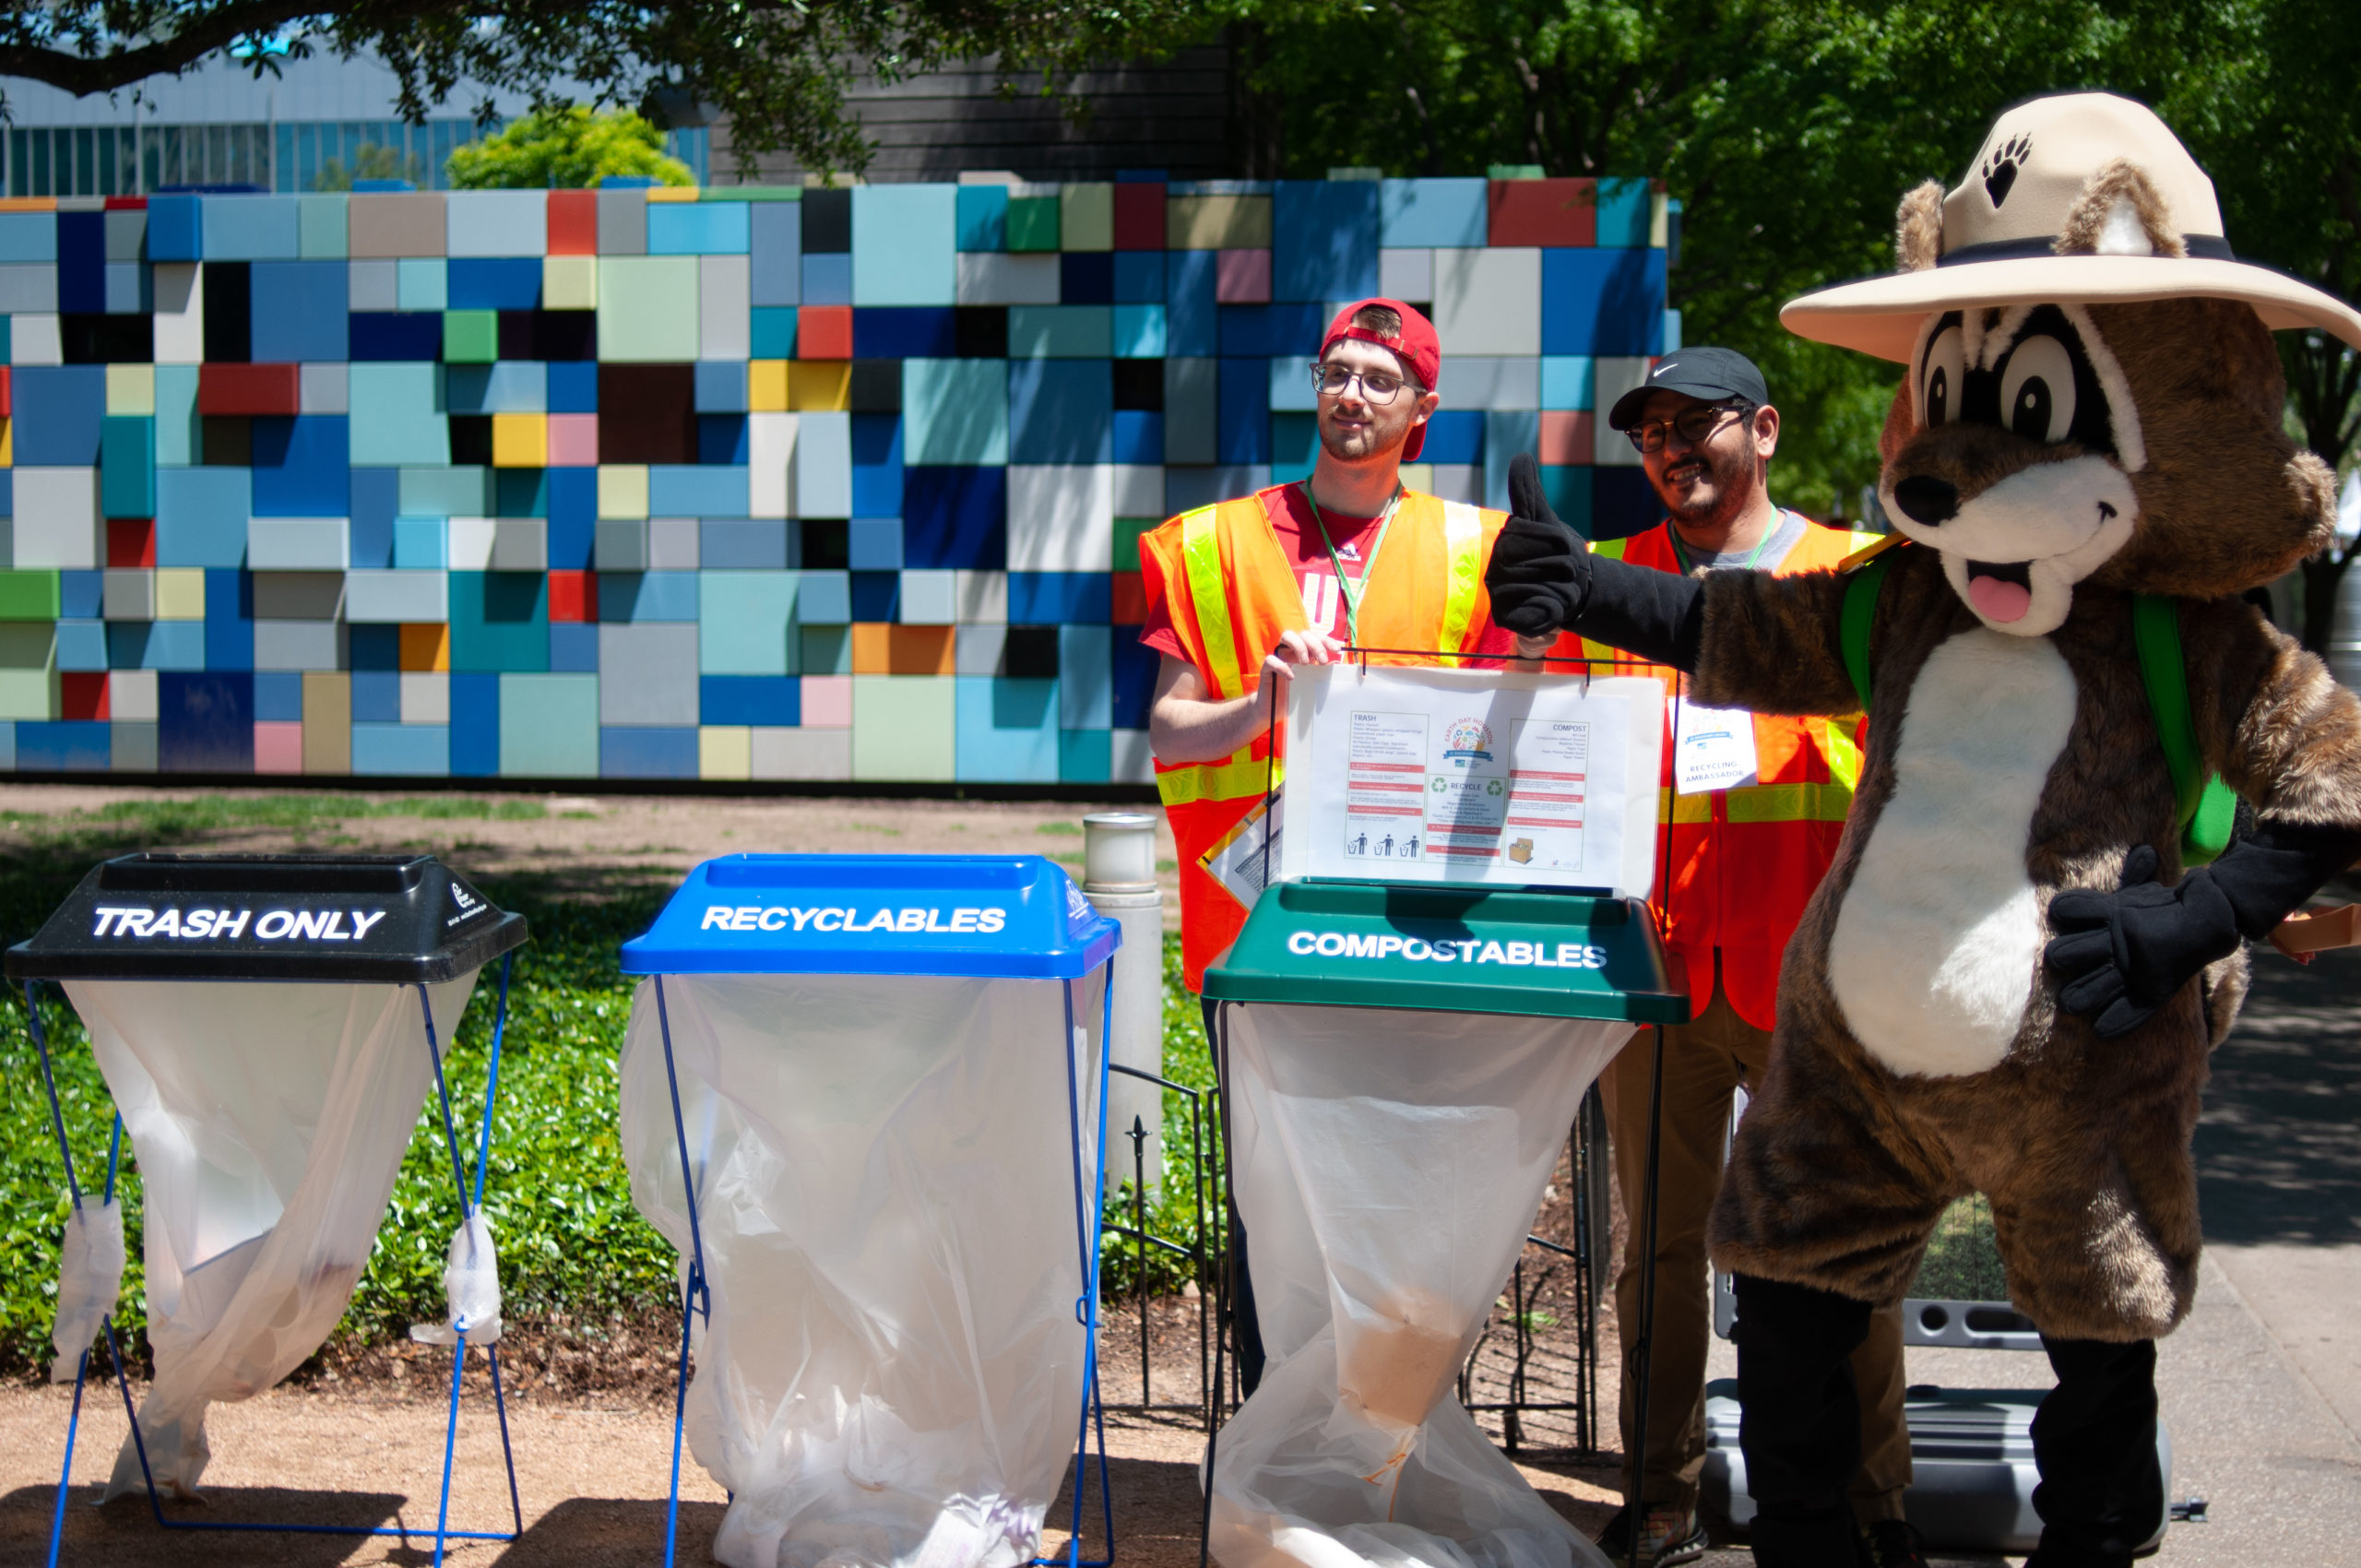 Houston aims for a zerowaste Earth Day Earth Day